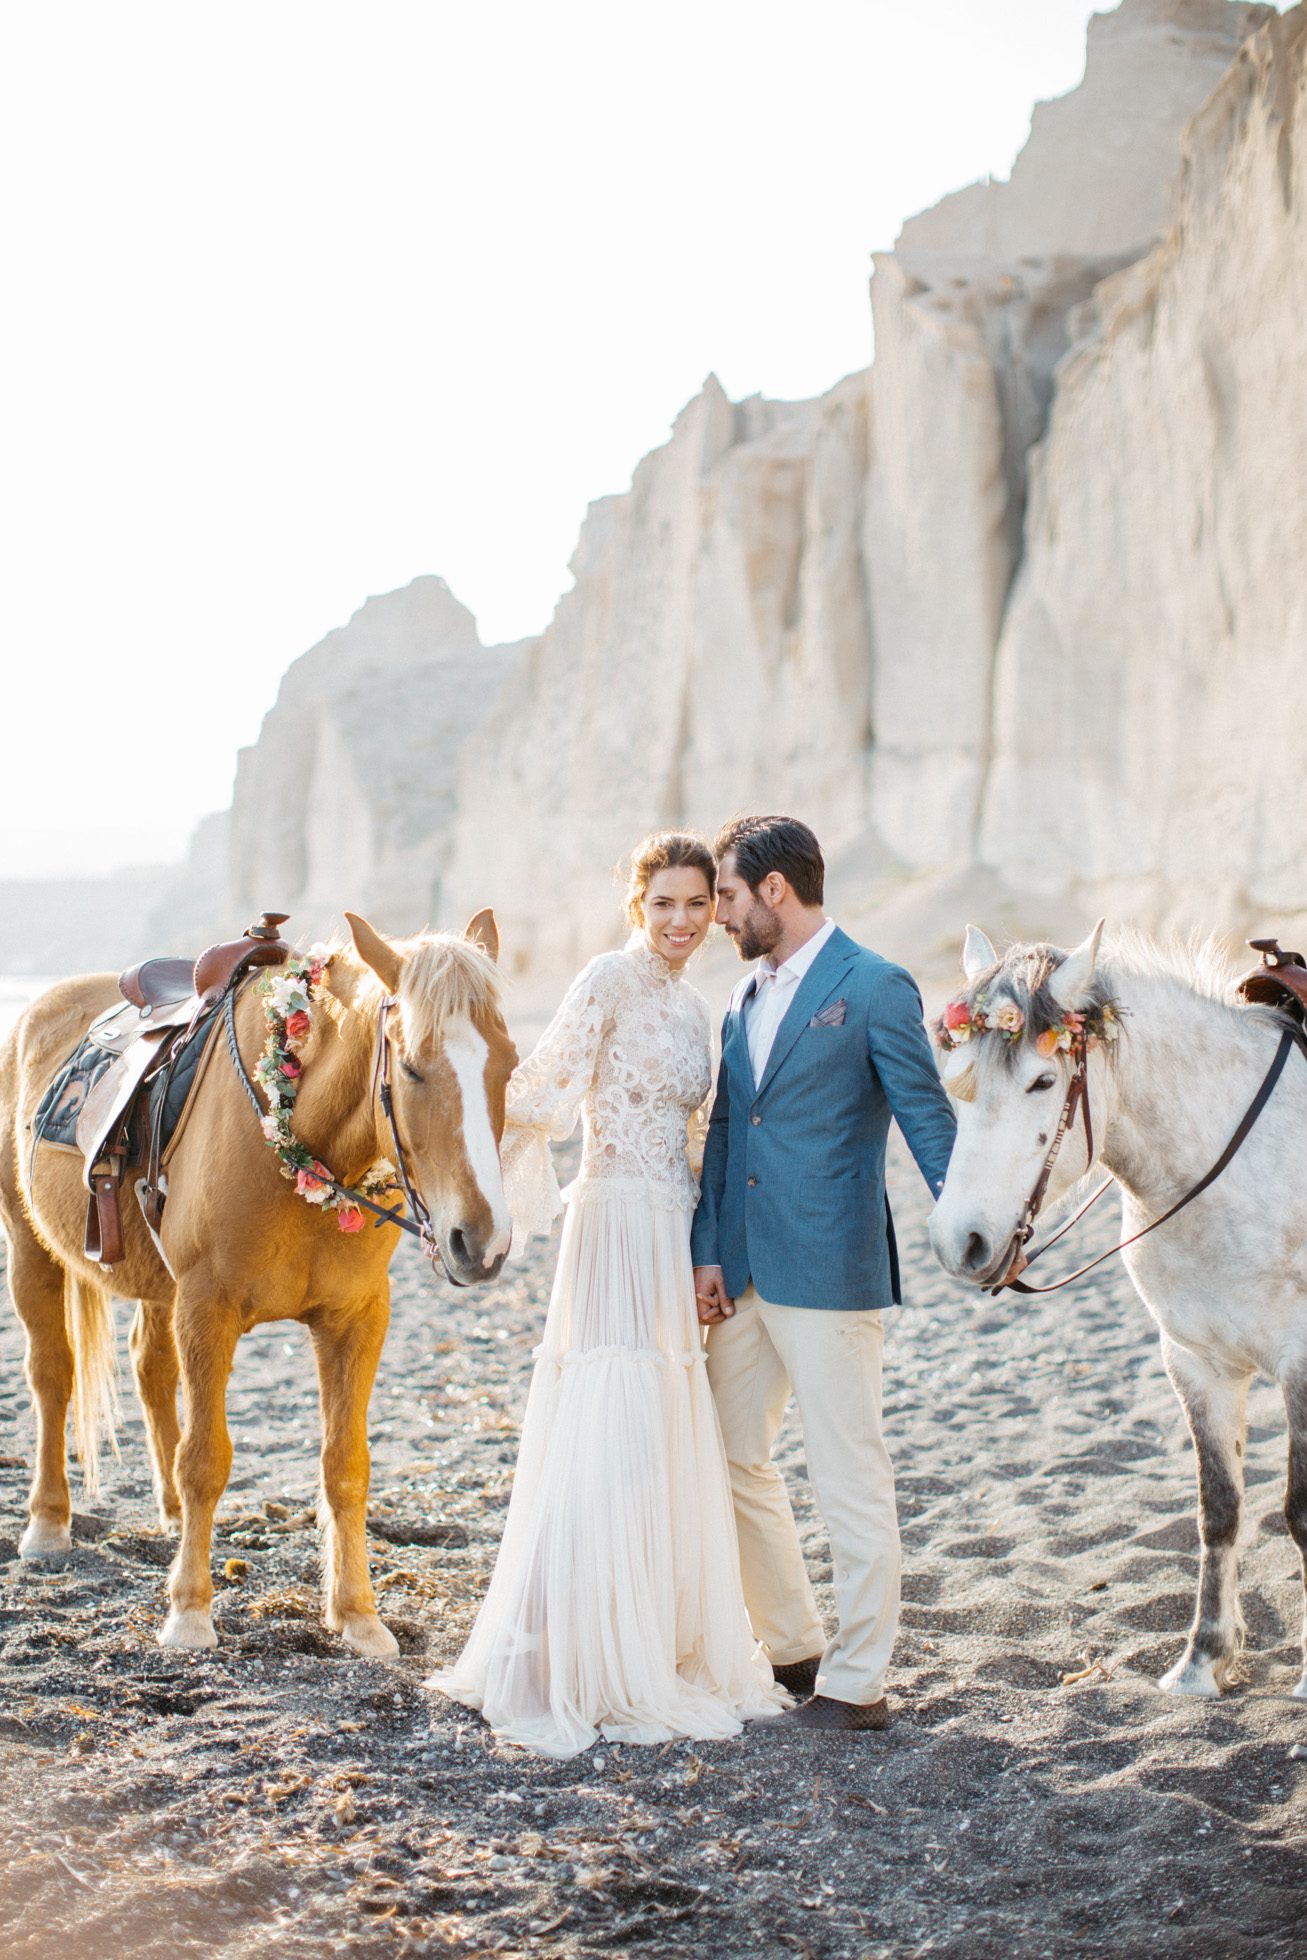 Beautiful romantic bride and groom with horses at a volcanic beach wedding inspiration session in Santorini Greece.